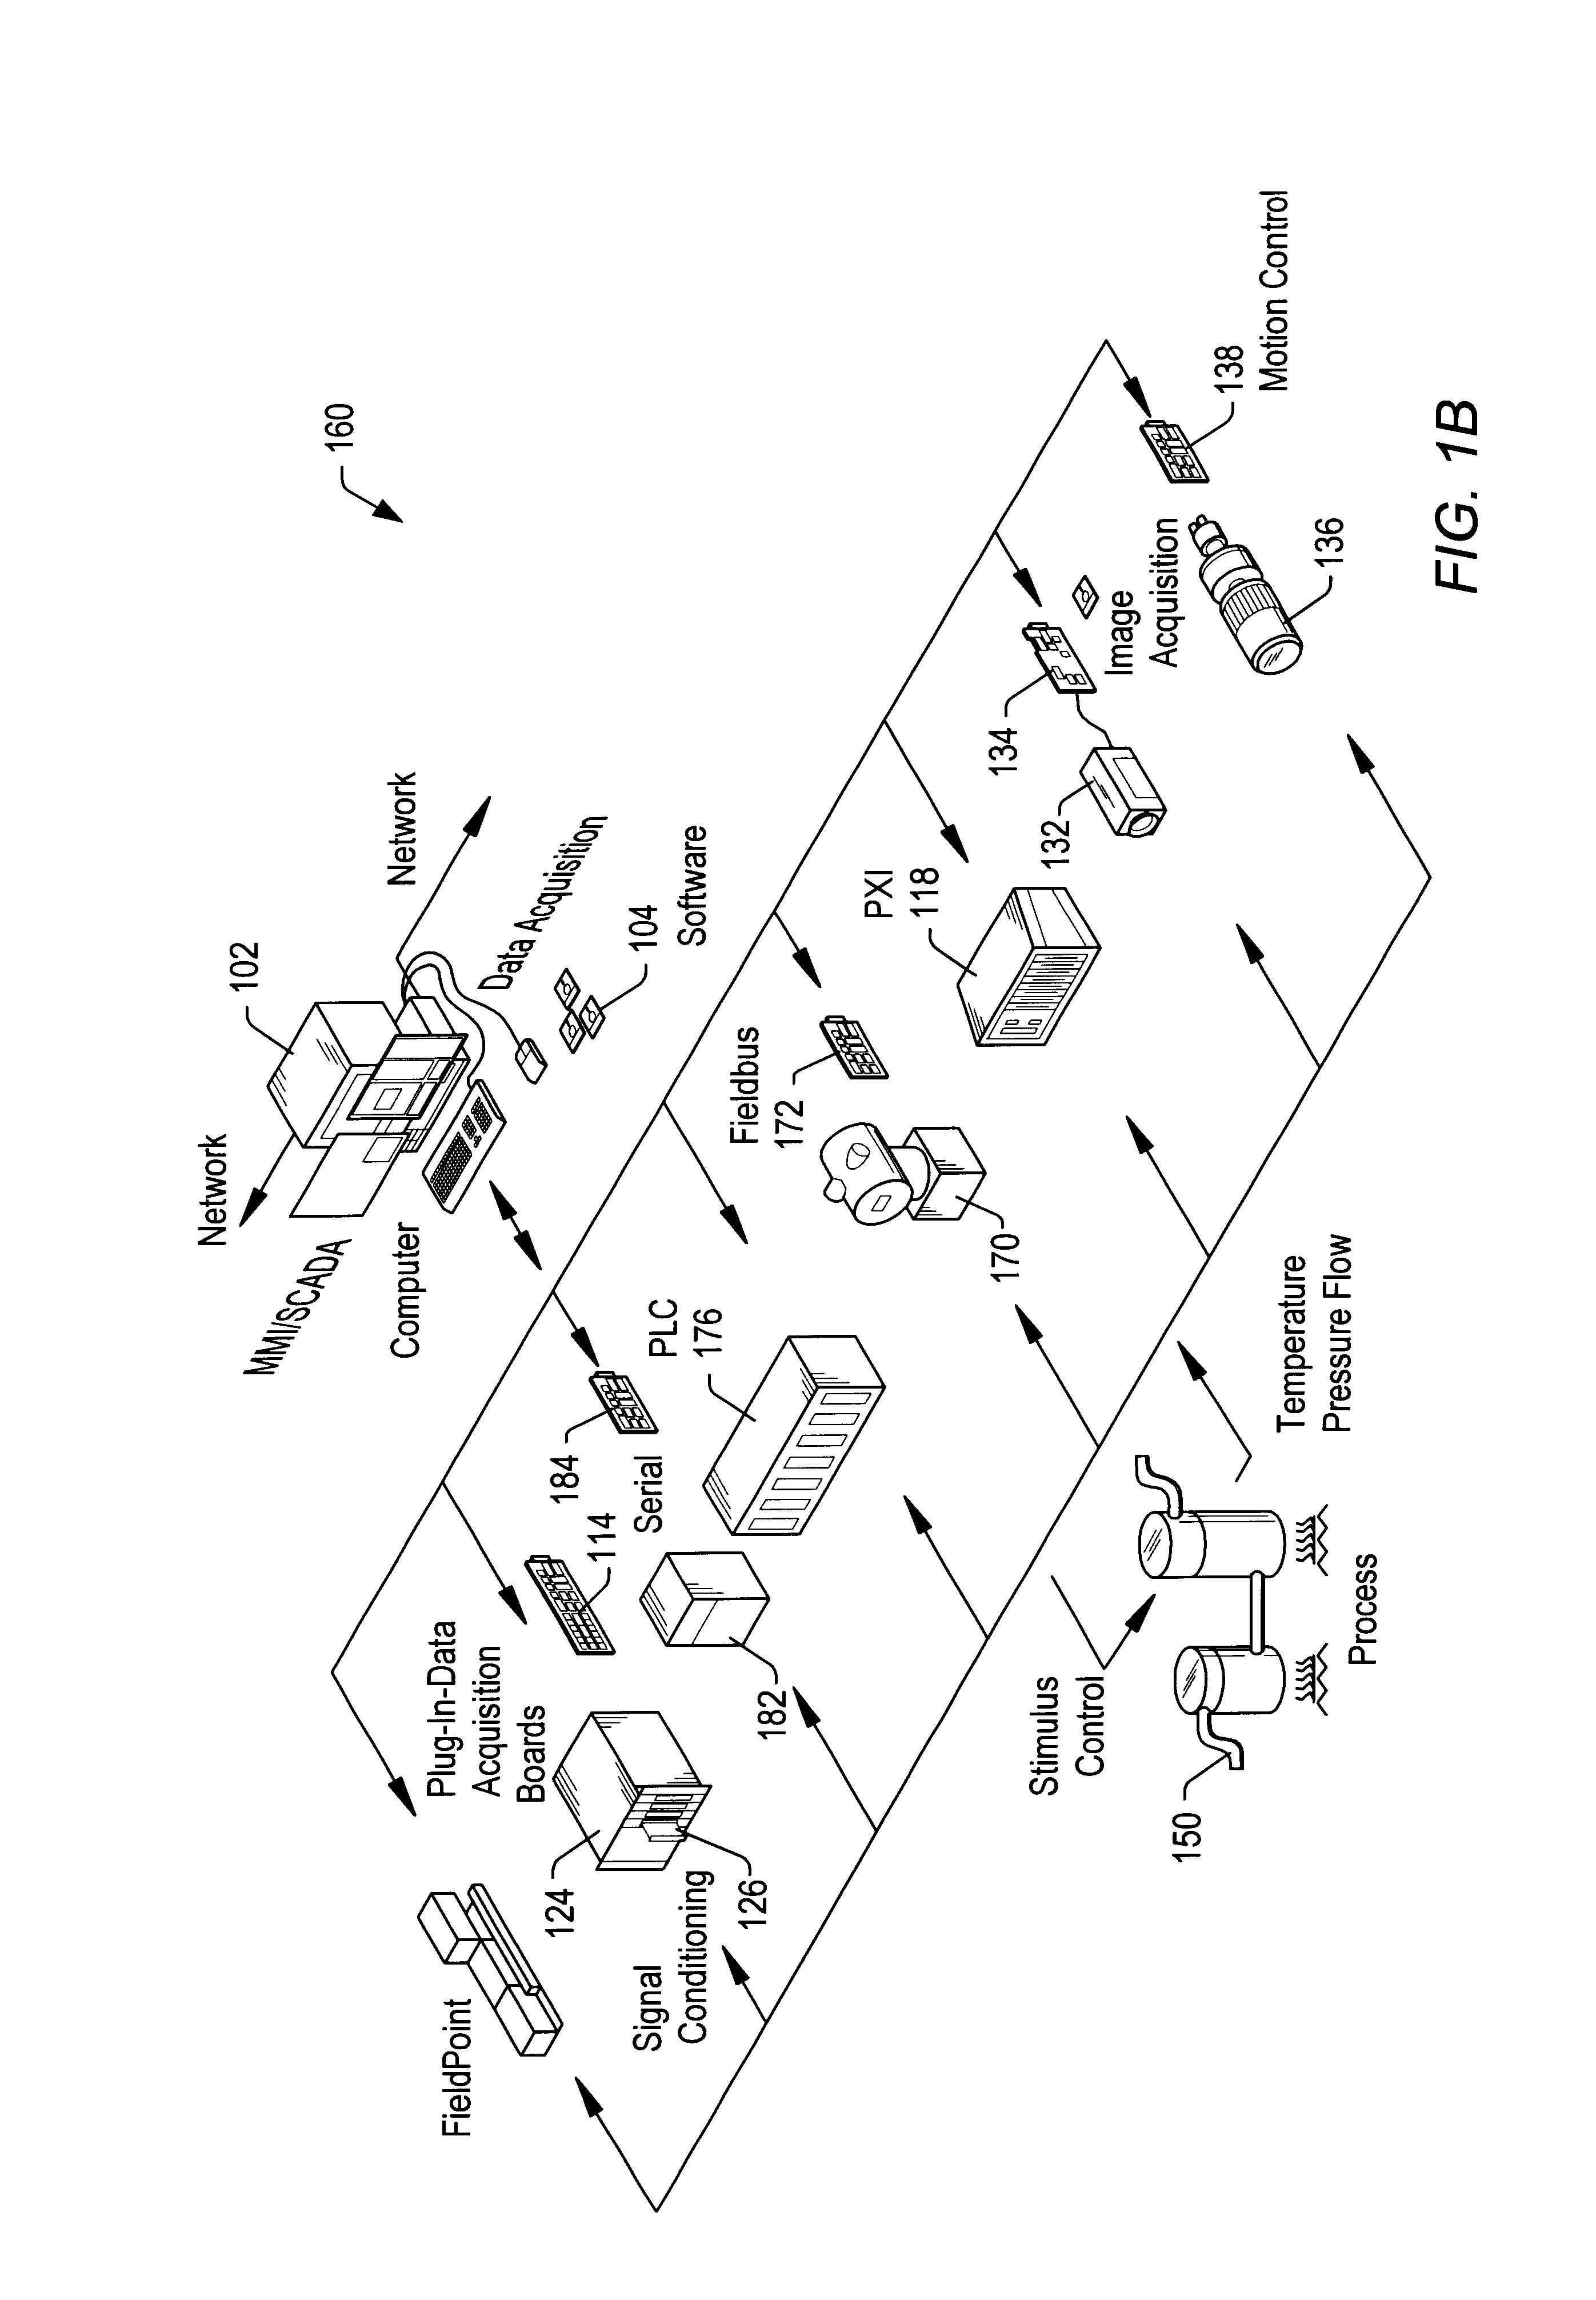 System and method for analyzing a surface by mapping sample points onto the surface and sampling the surface at the mapped points